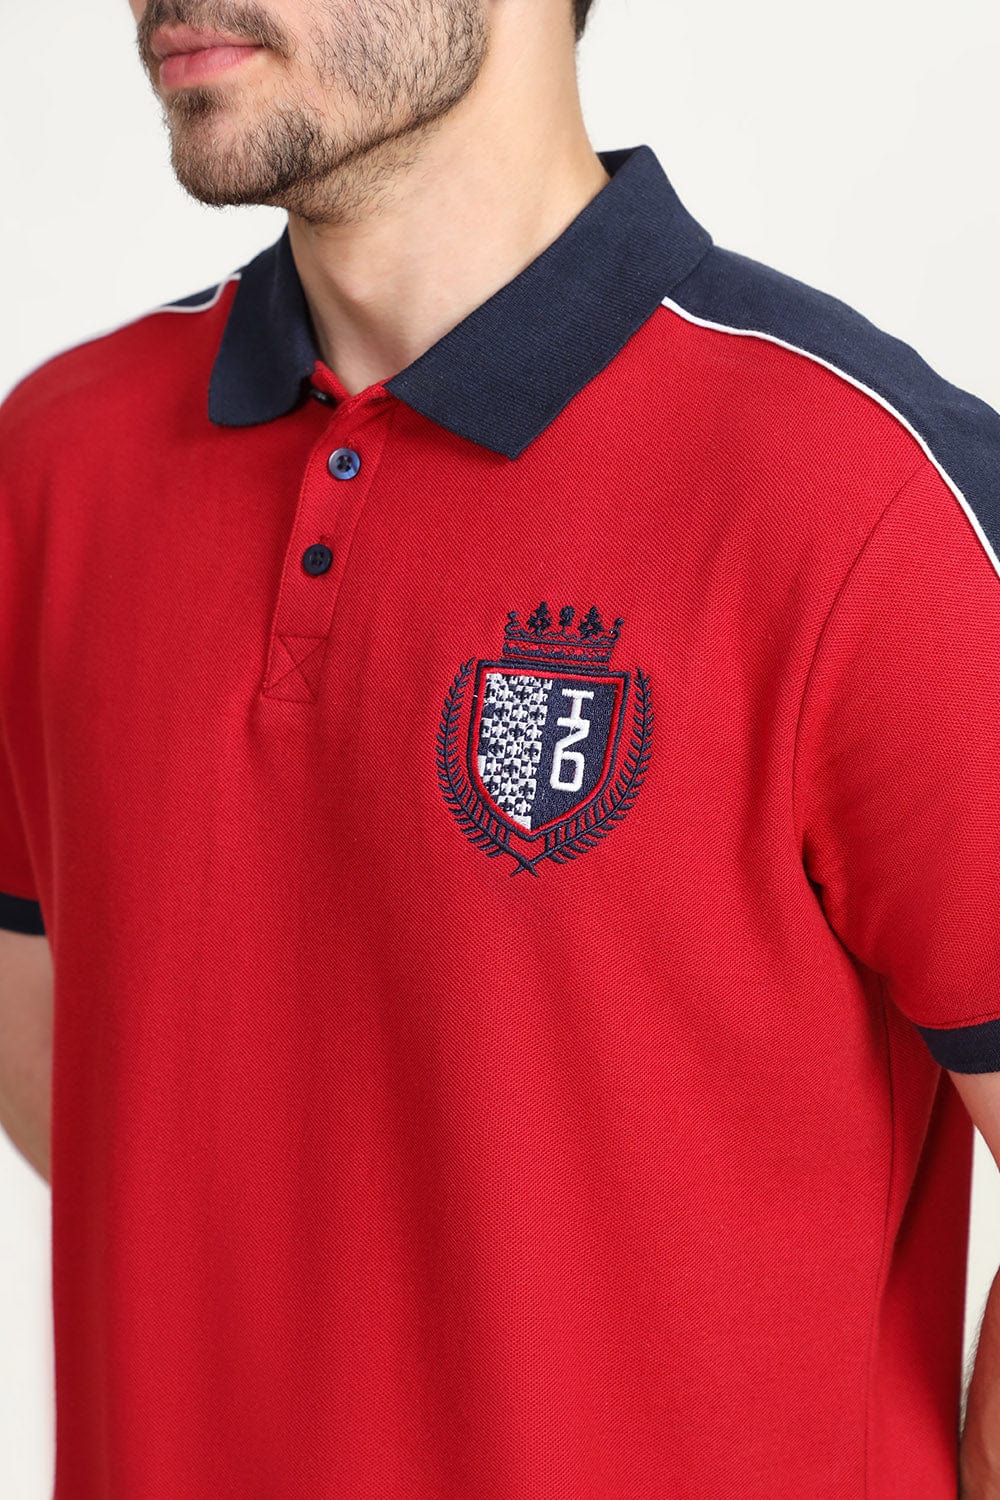 Hope Not Out by Shahid Afridi Men Polo Shirt Man Hno Emblem Panneled Polo